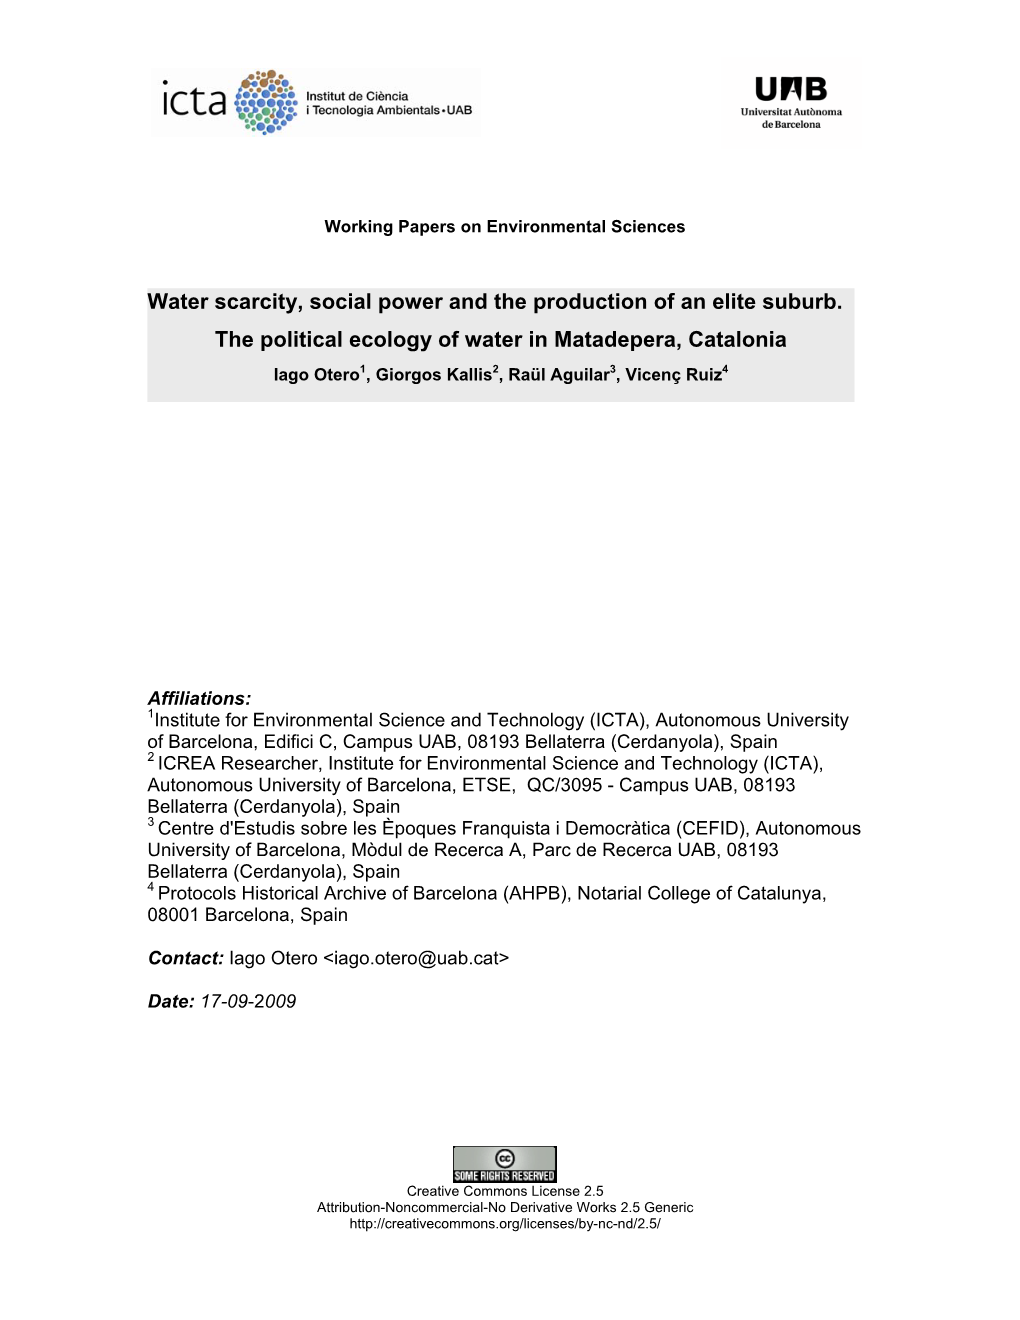 Water Scarcity, Social Power and the Production of an Elite Suburb. the Political Ecology of Water in Matadepera, Catalonia, Working Papers on Environmental Sciences